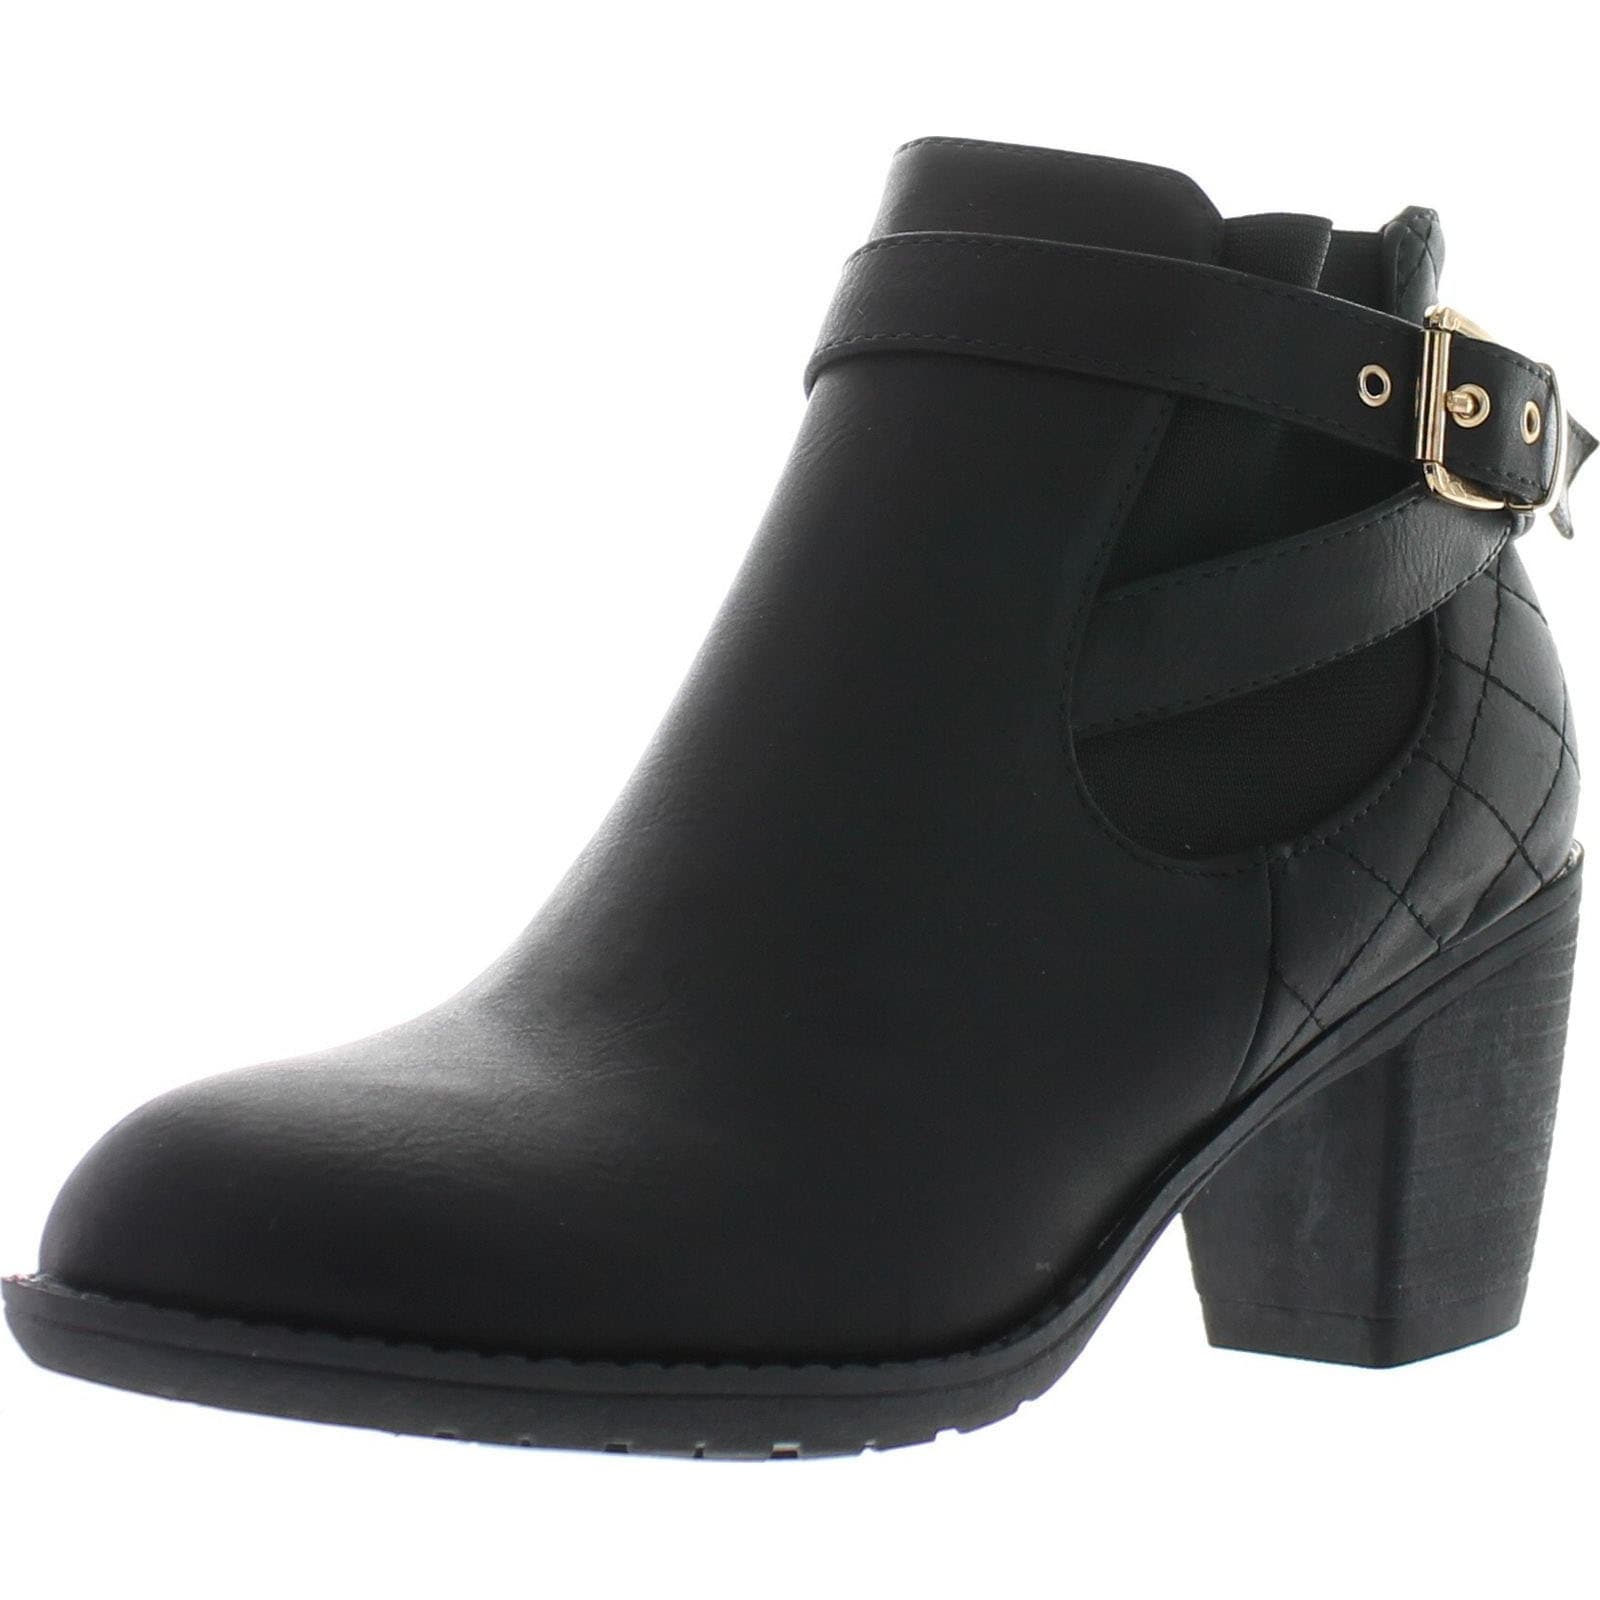 black booties rubber sole